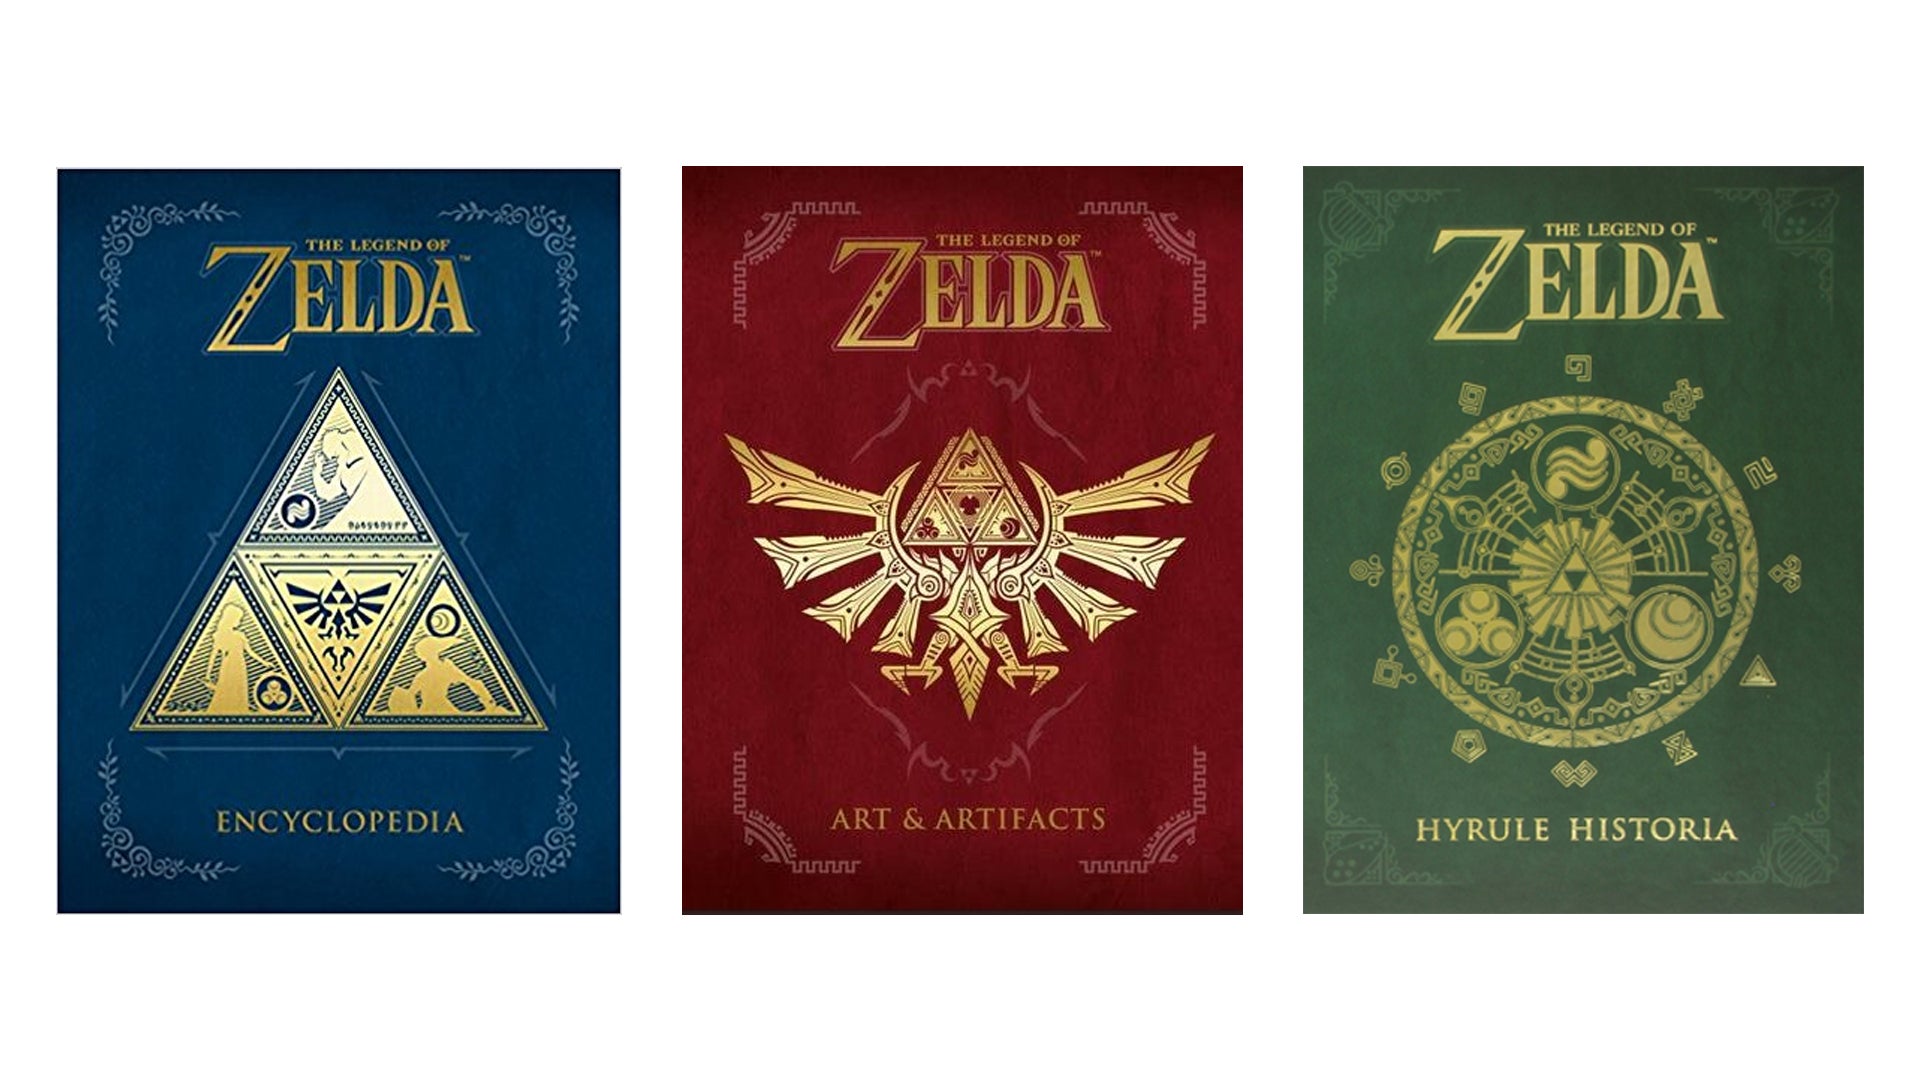 Image for Zelda Encyclopedia, Hyrule Historia and Arts & Artifacts Books down by 40% This Week